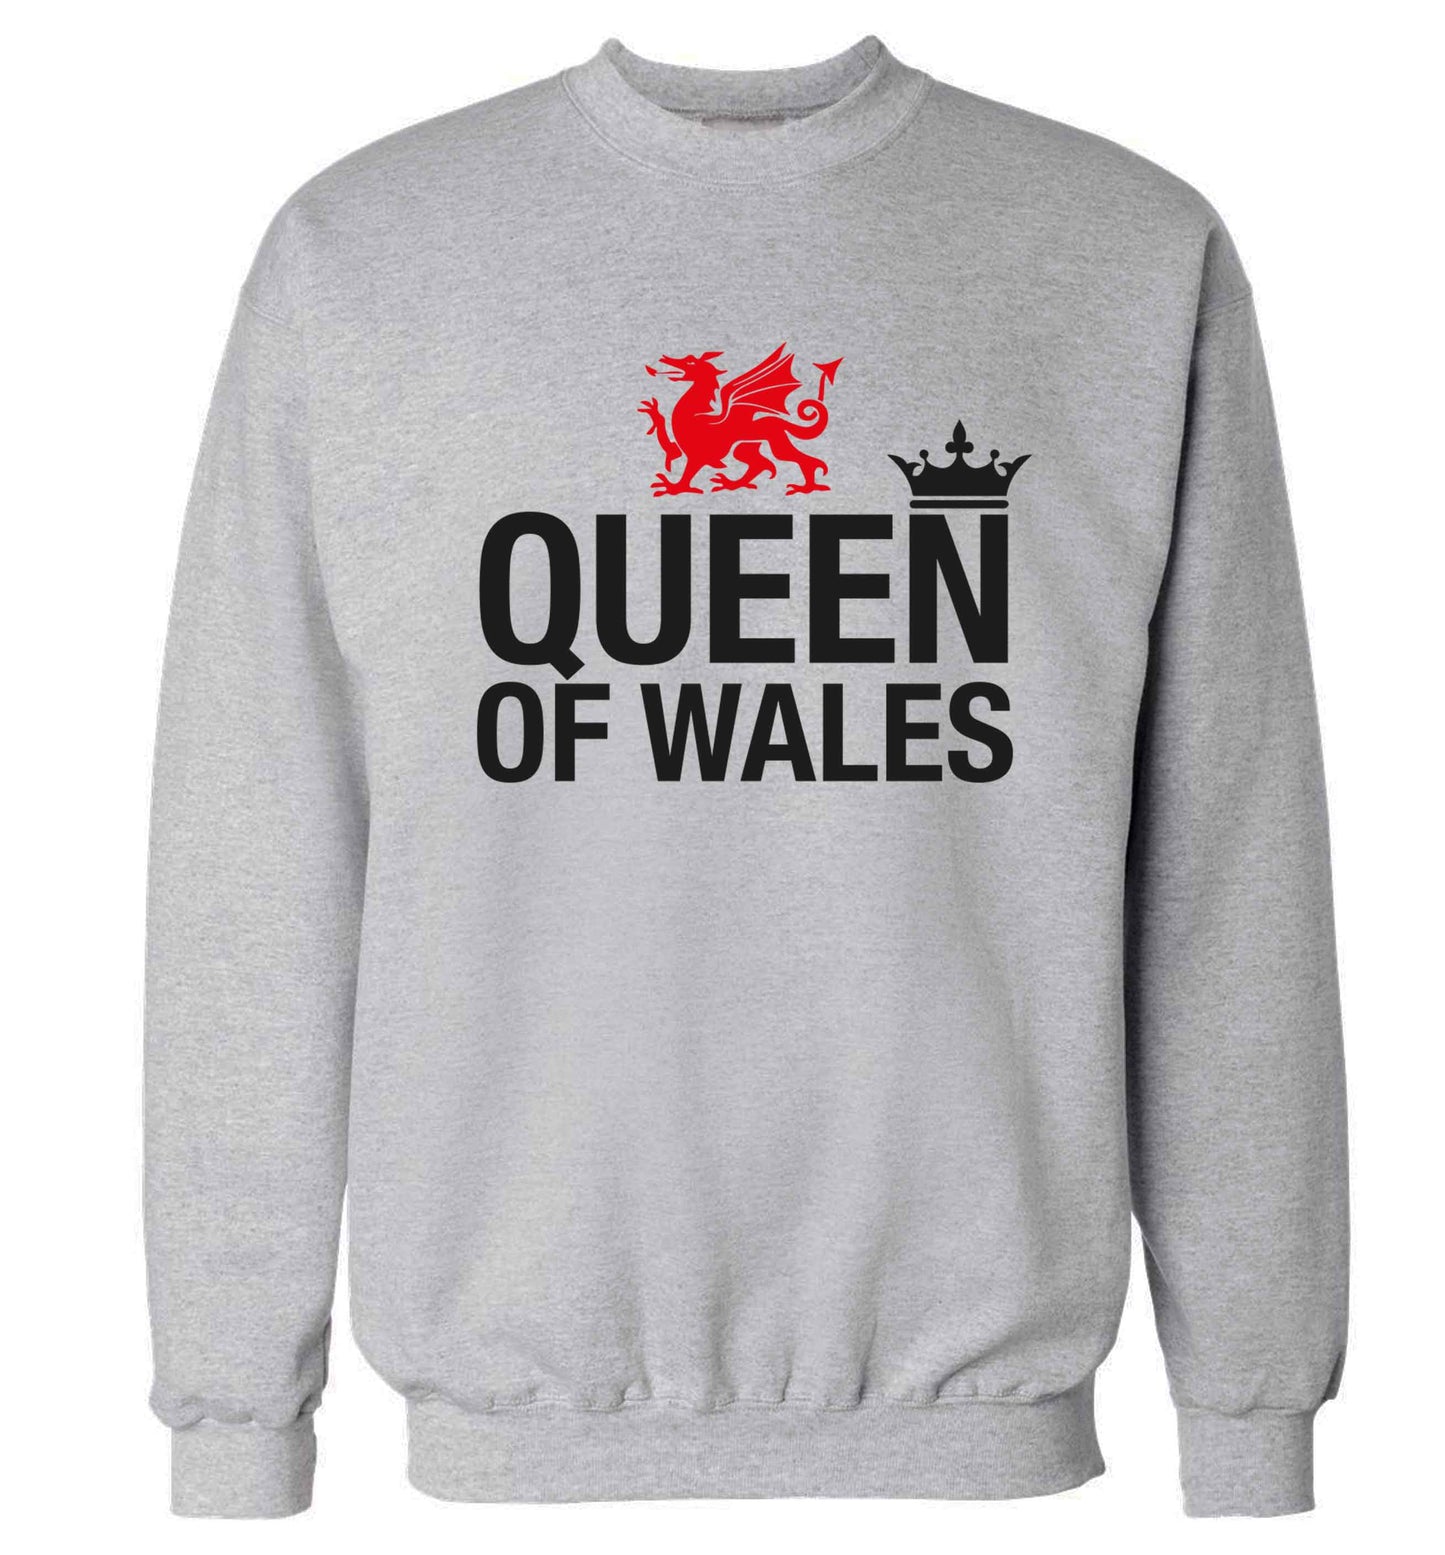 Queen of Wales Adult's unisex grey Sweater 2XL